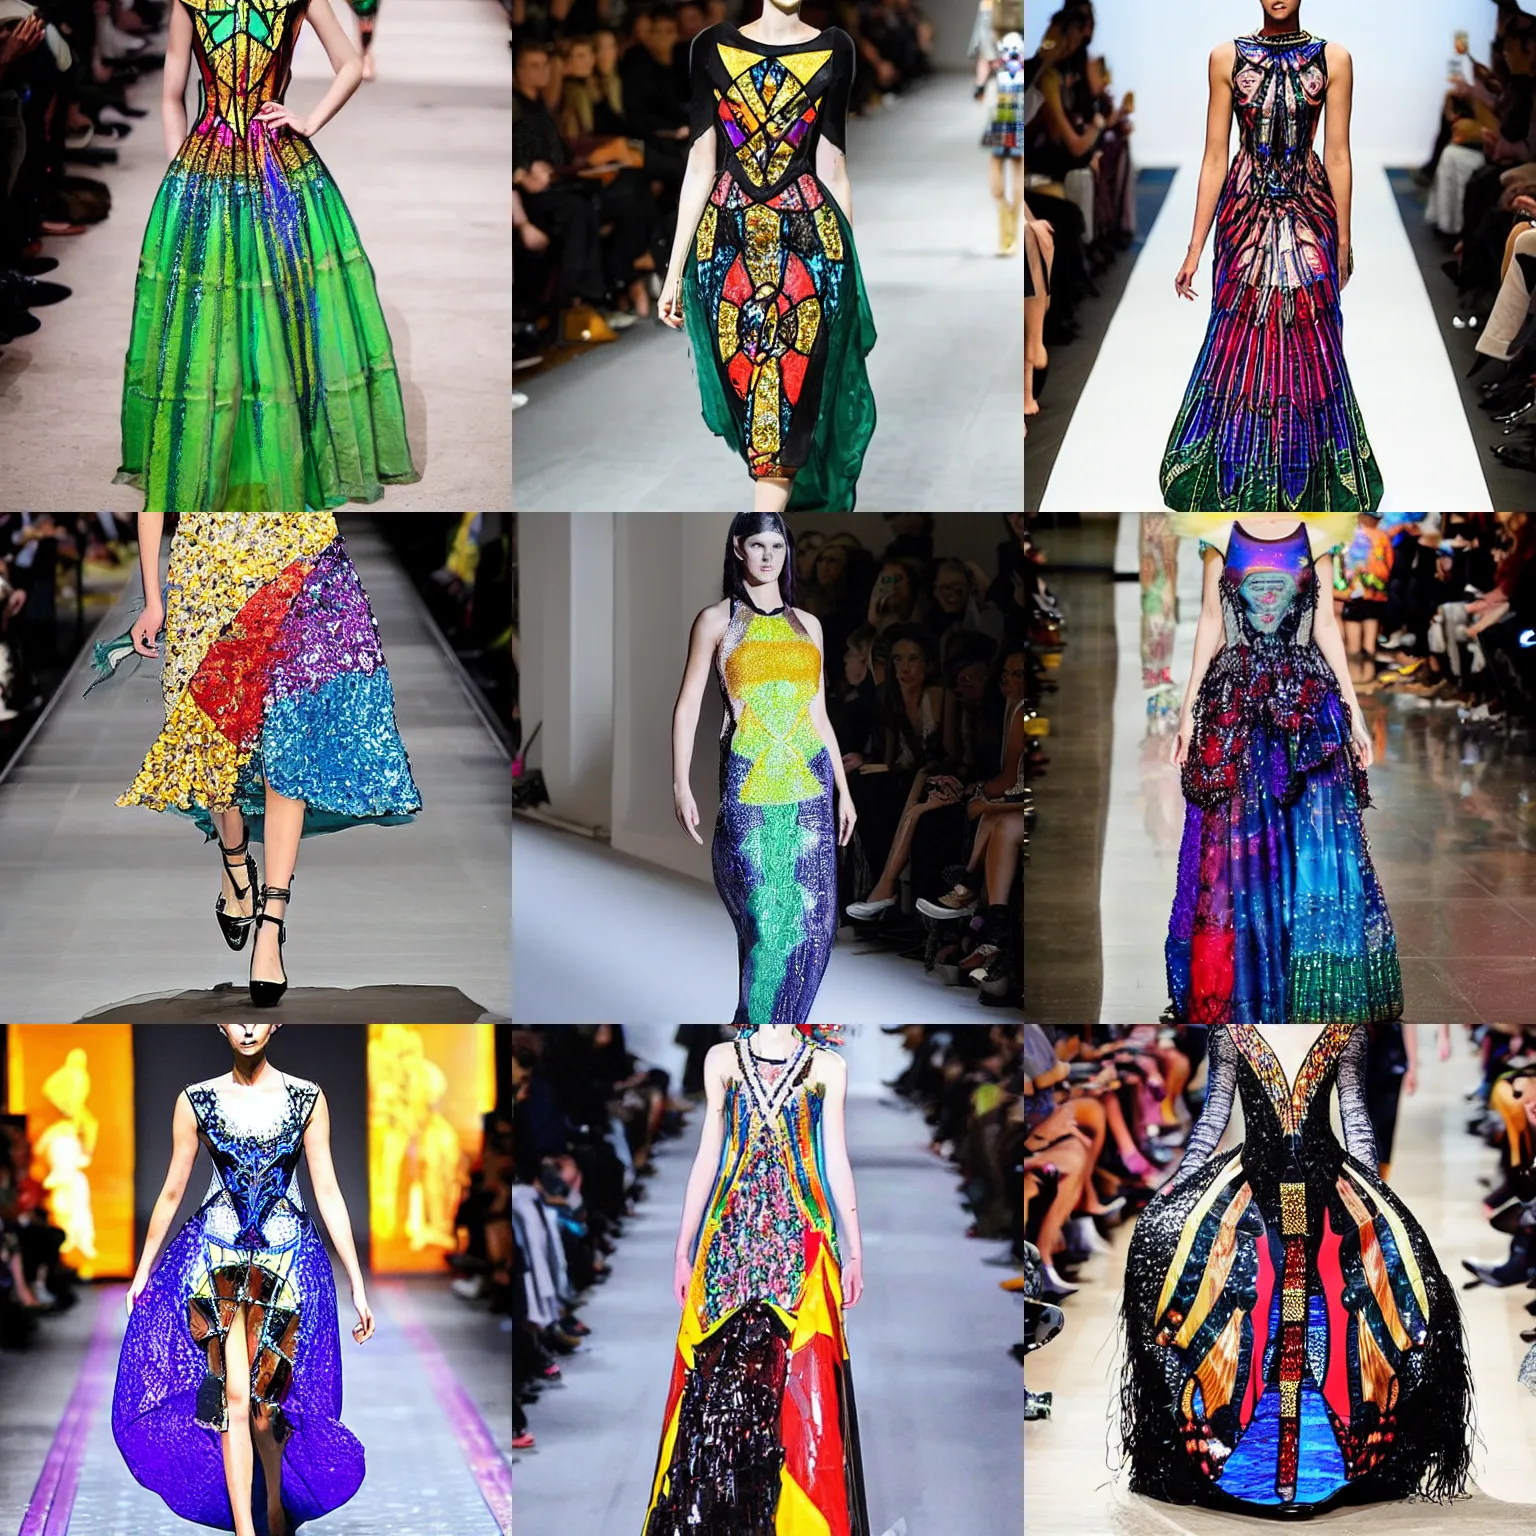 Prompt: “paris fashion week model walking on the runway wearing a high fashion dress made out of stained glass”